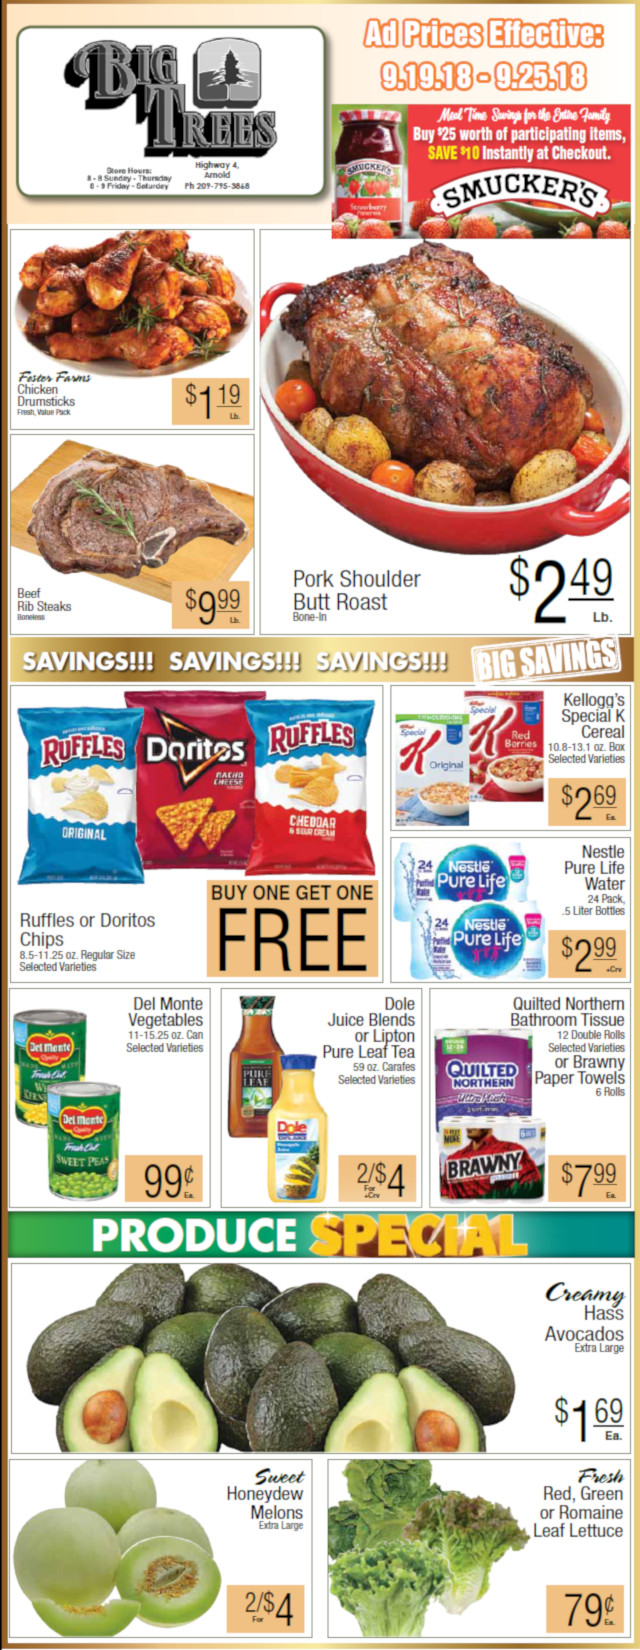 Big Trees Market Weekly Ad & Grocery Specials Though September 25th